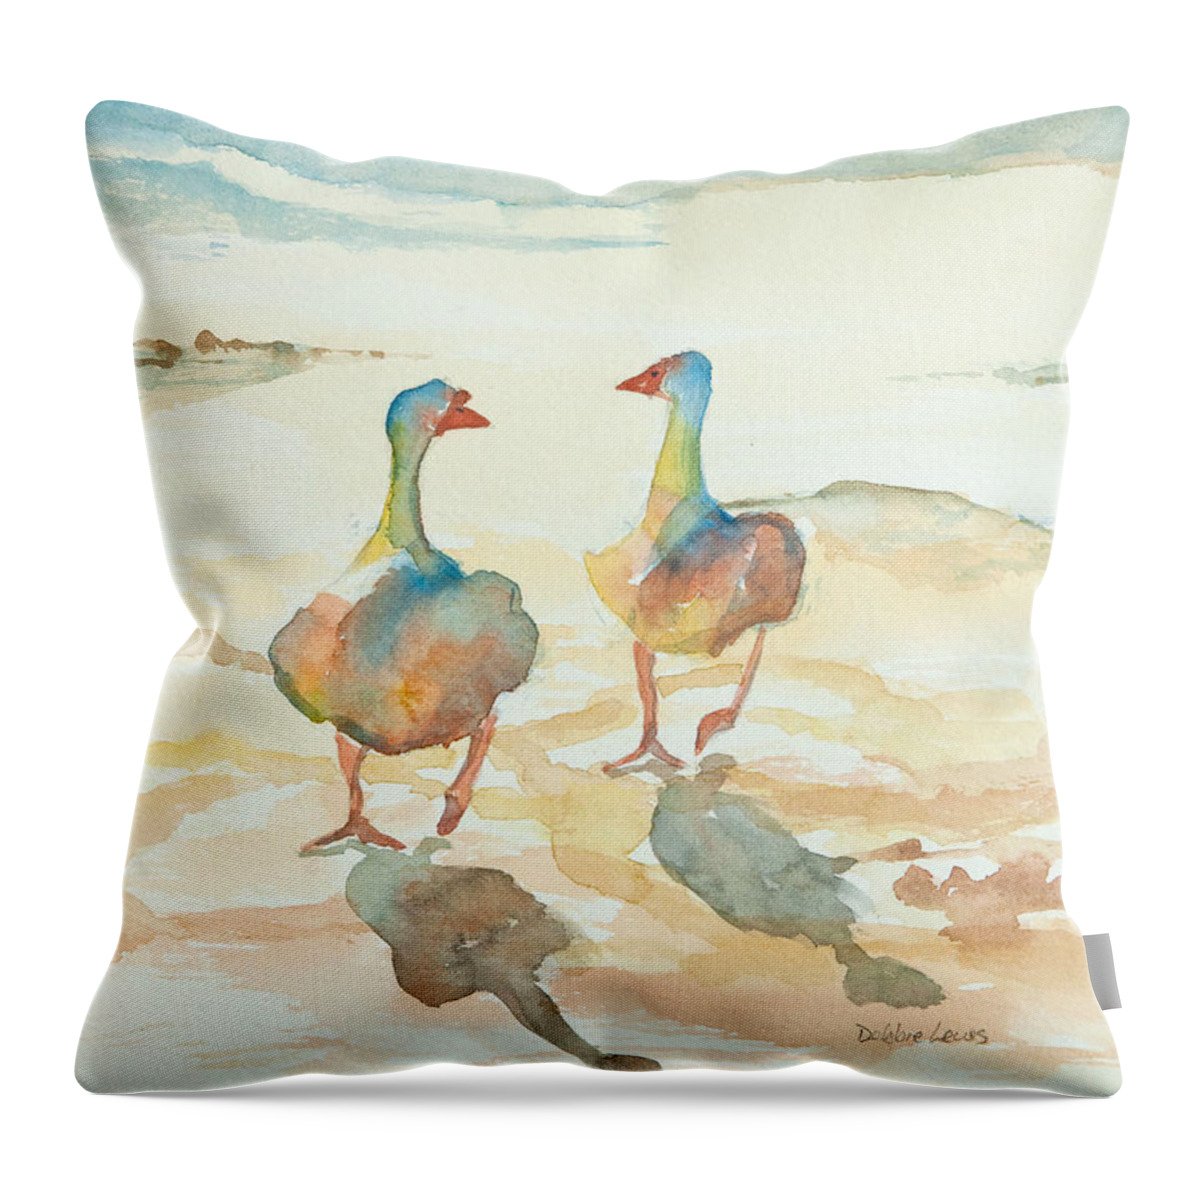 Watercolors For Sale Throw Pillow featuring the painting It's a Ducky Day by Debbie Lewis